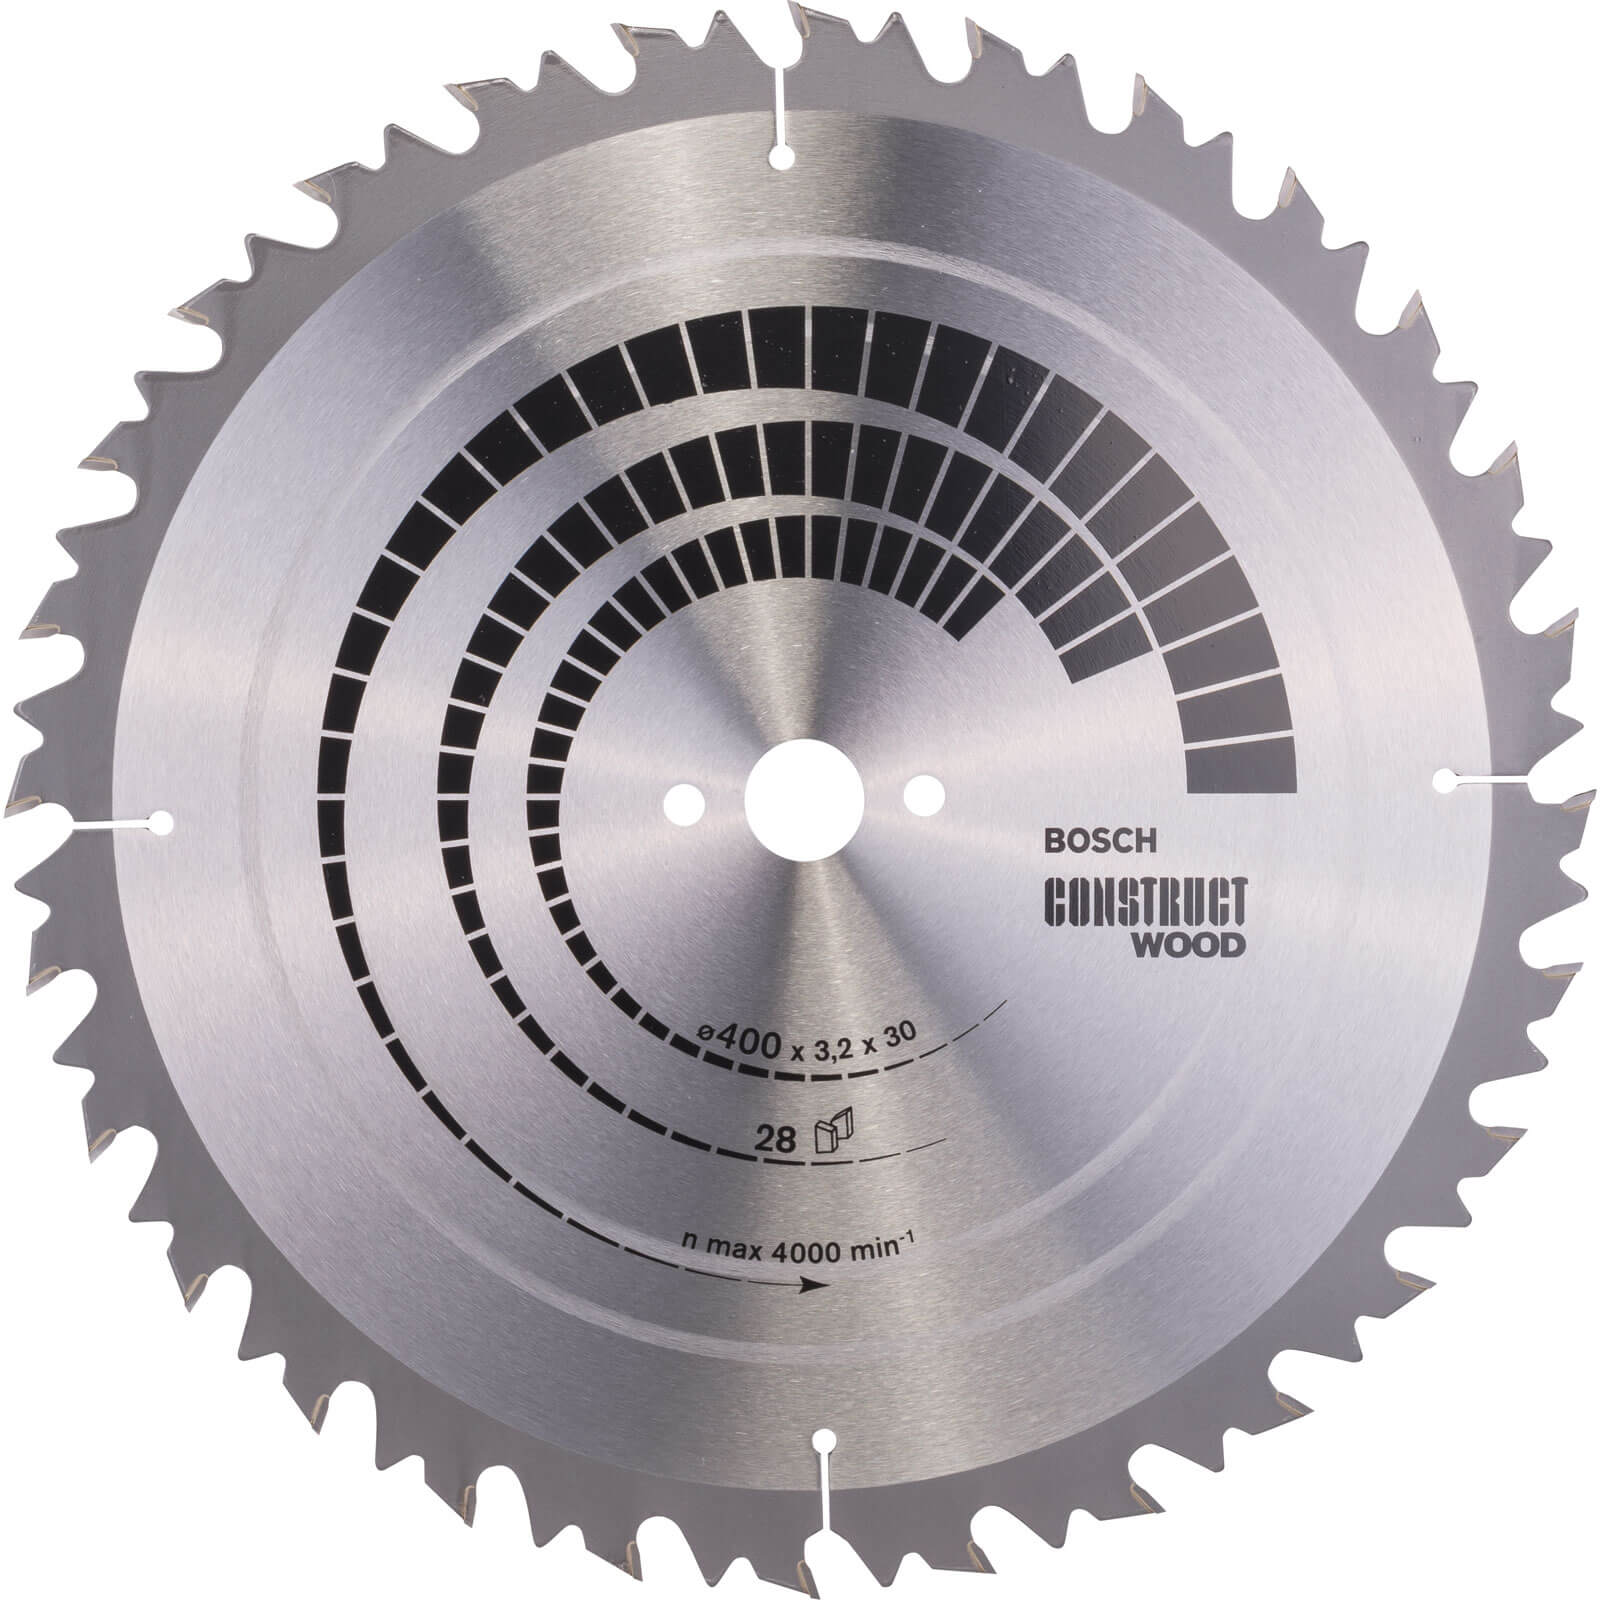 Photos - Power Tool Accessory Bosch Construct Wood Cutting Table Saw Blade 400mm 28T 30mm 